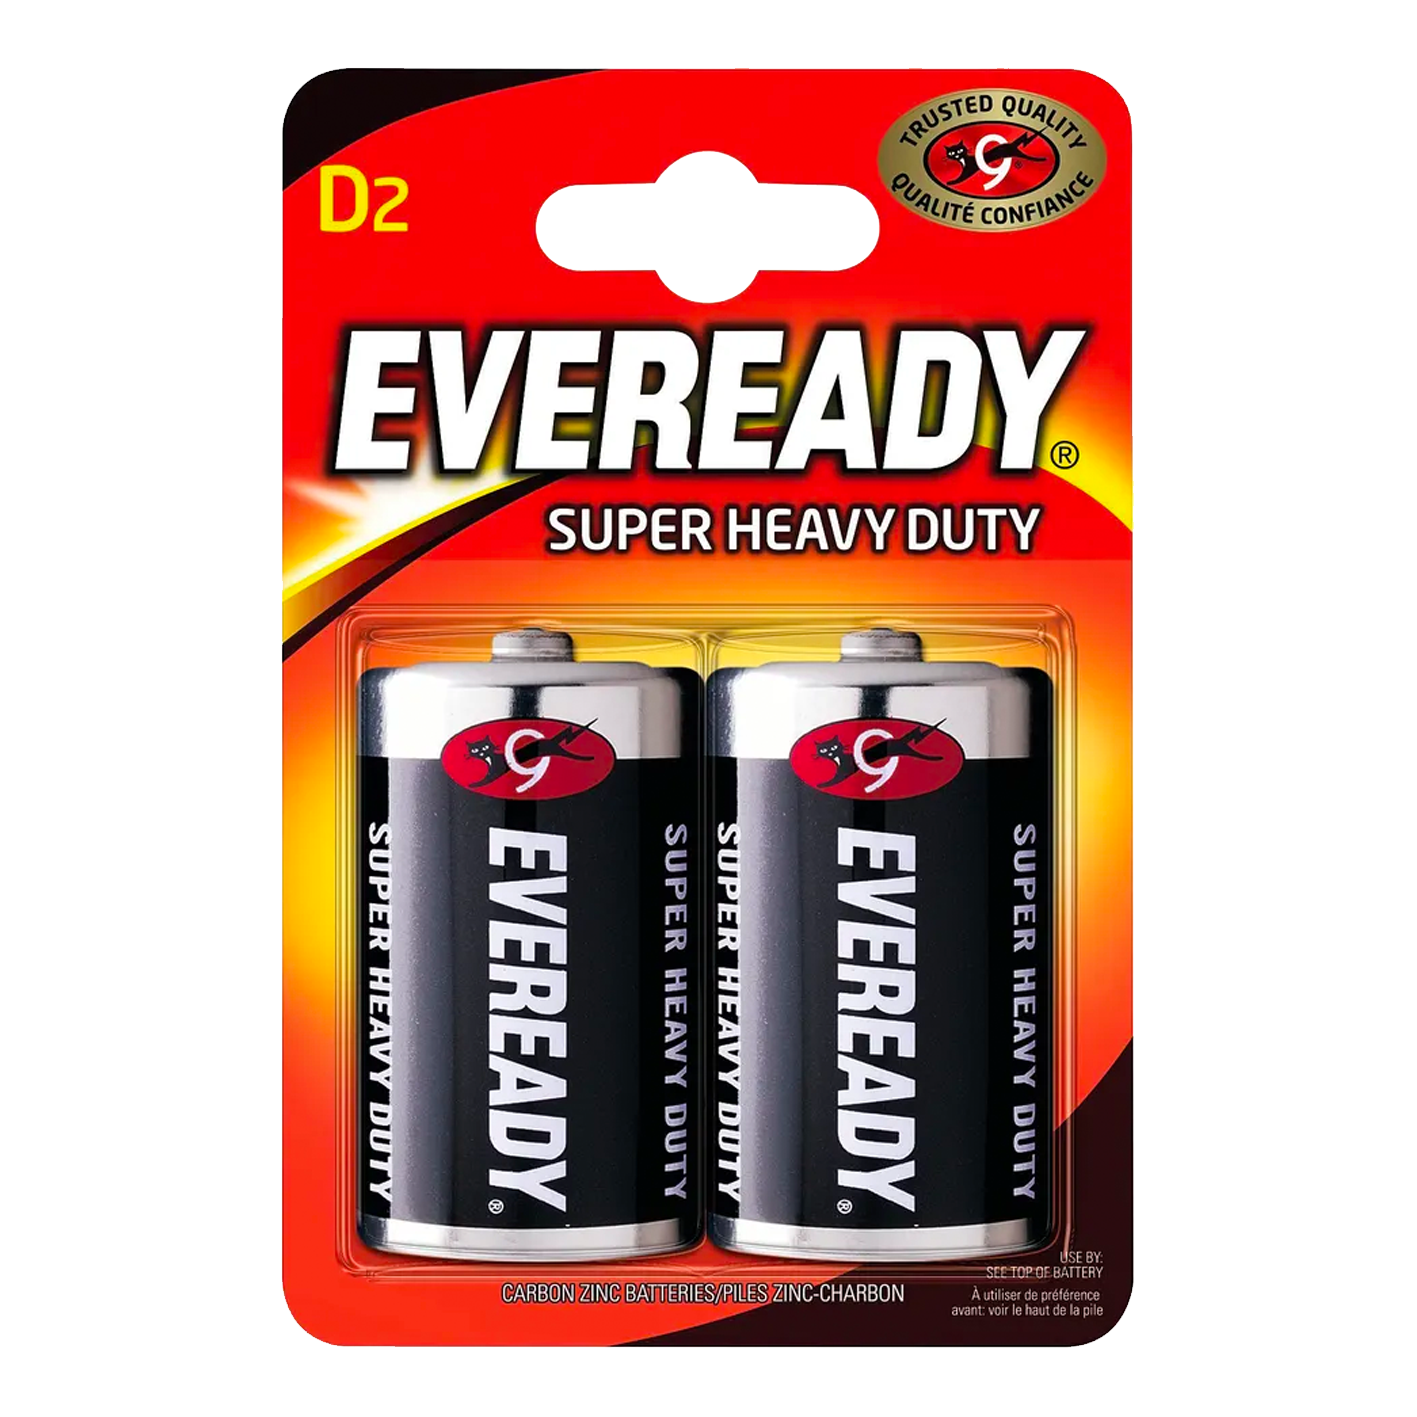 Eveready D Size 20 Super Heavy Duty, Pack of 2